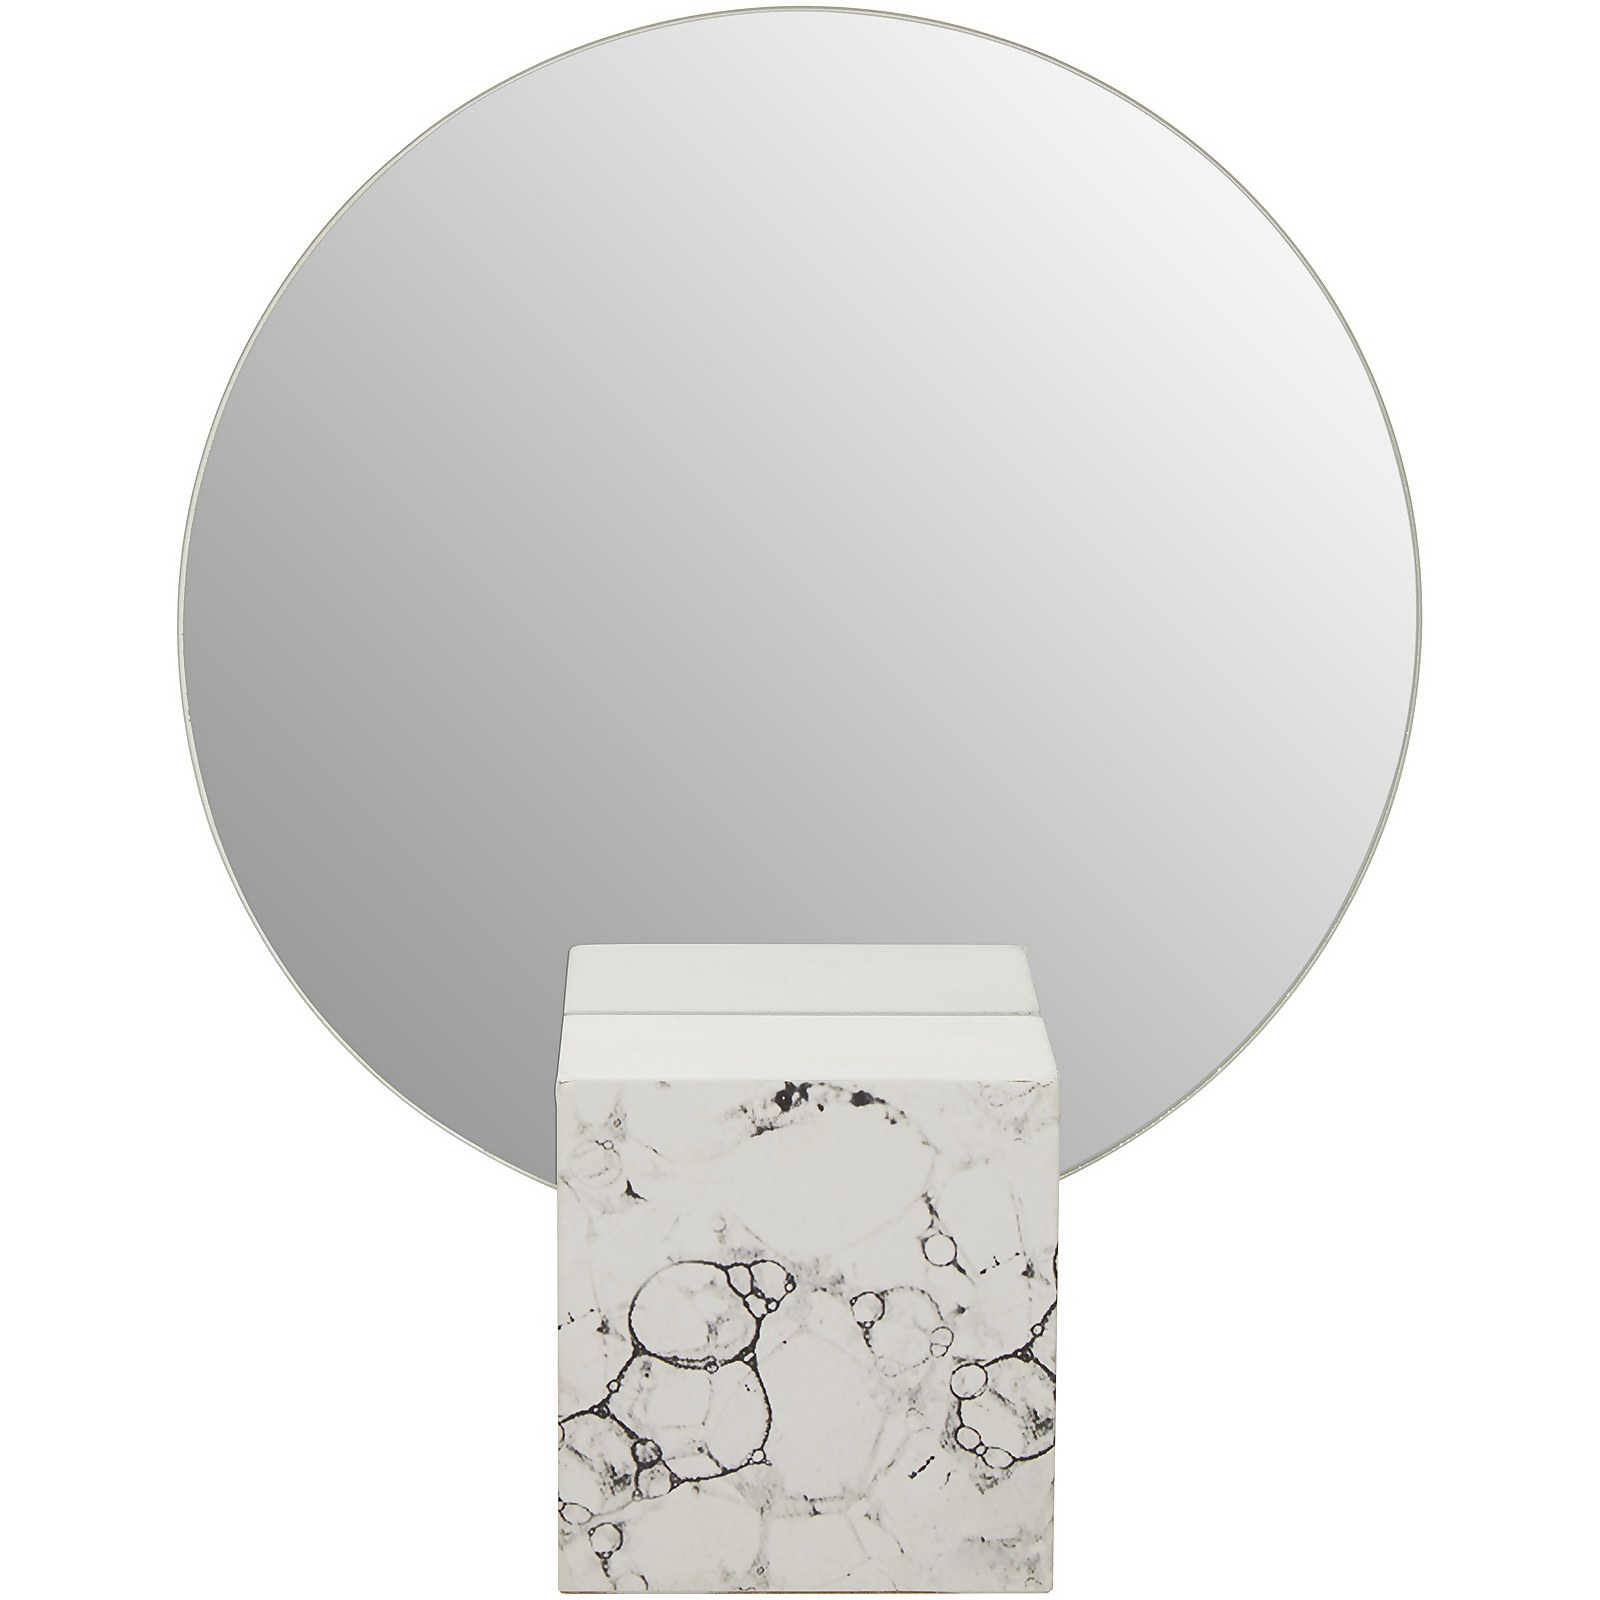 Image of Mimo Mirror - White Faux Marble